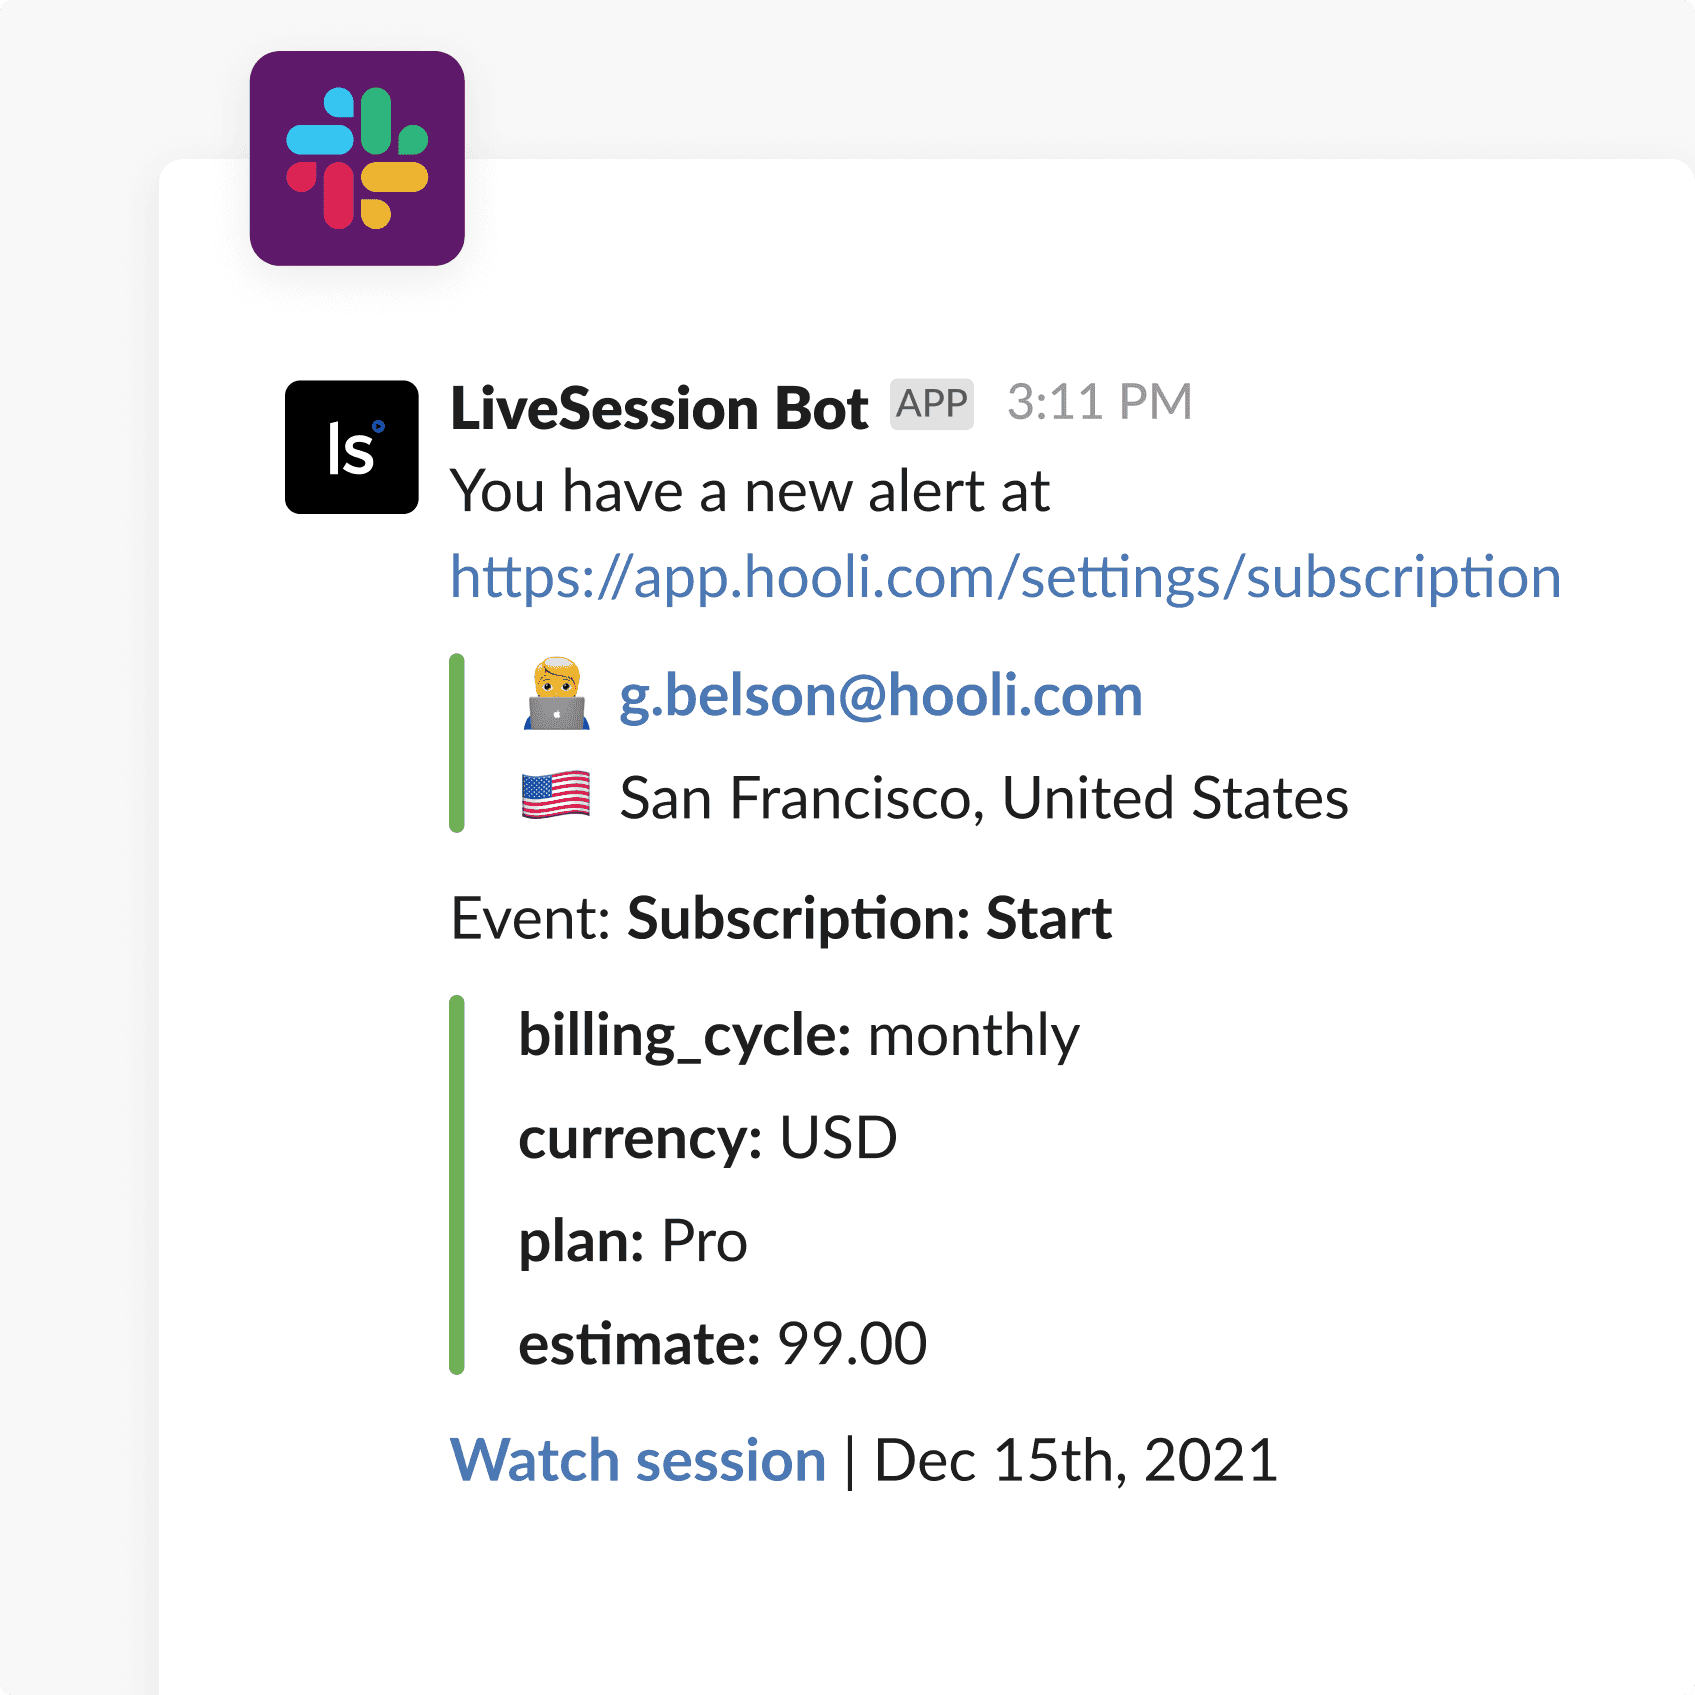 notifications from Slack about important business events, such as starting a new subscription or completing the process of bringing users into the app